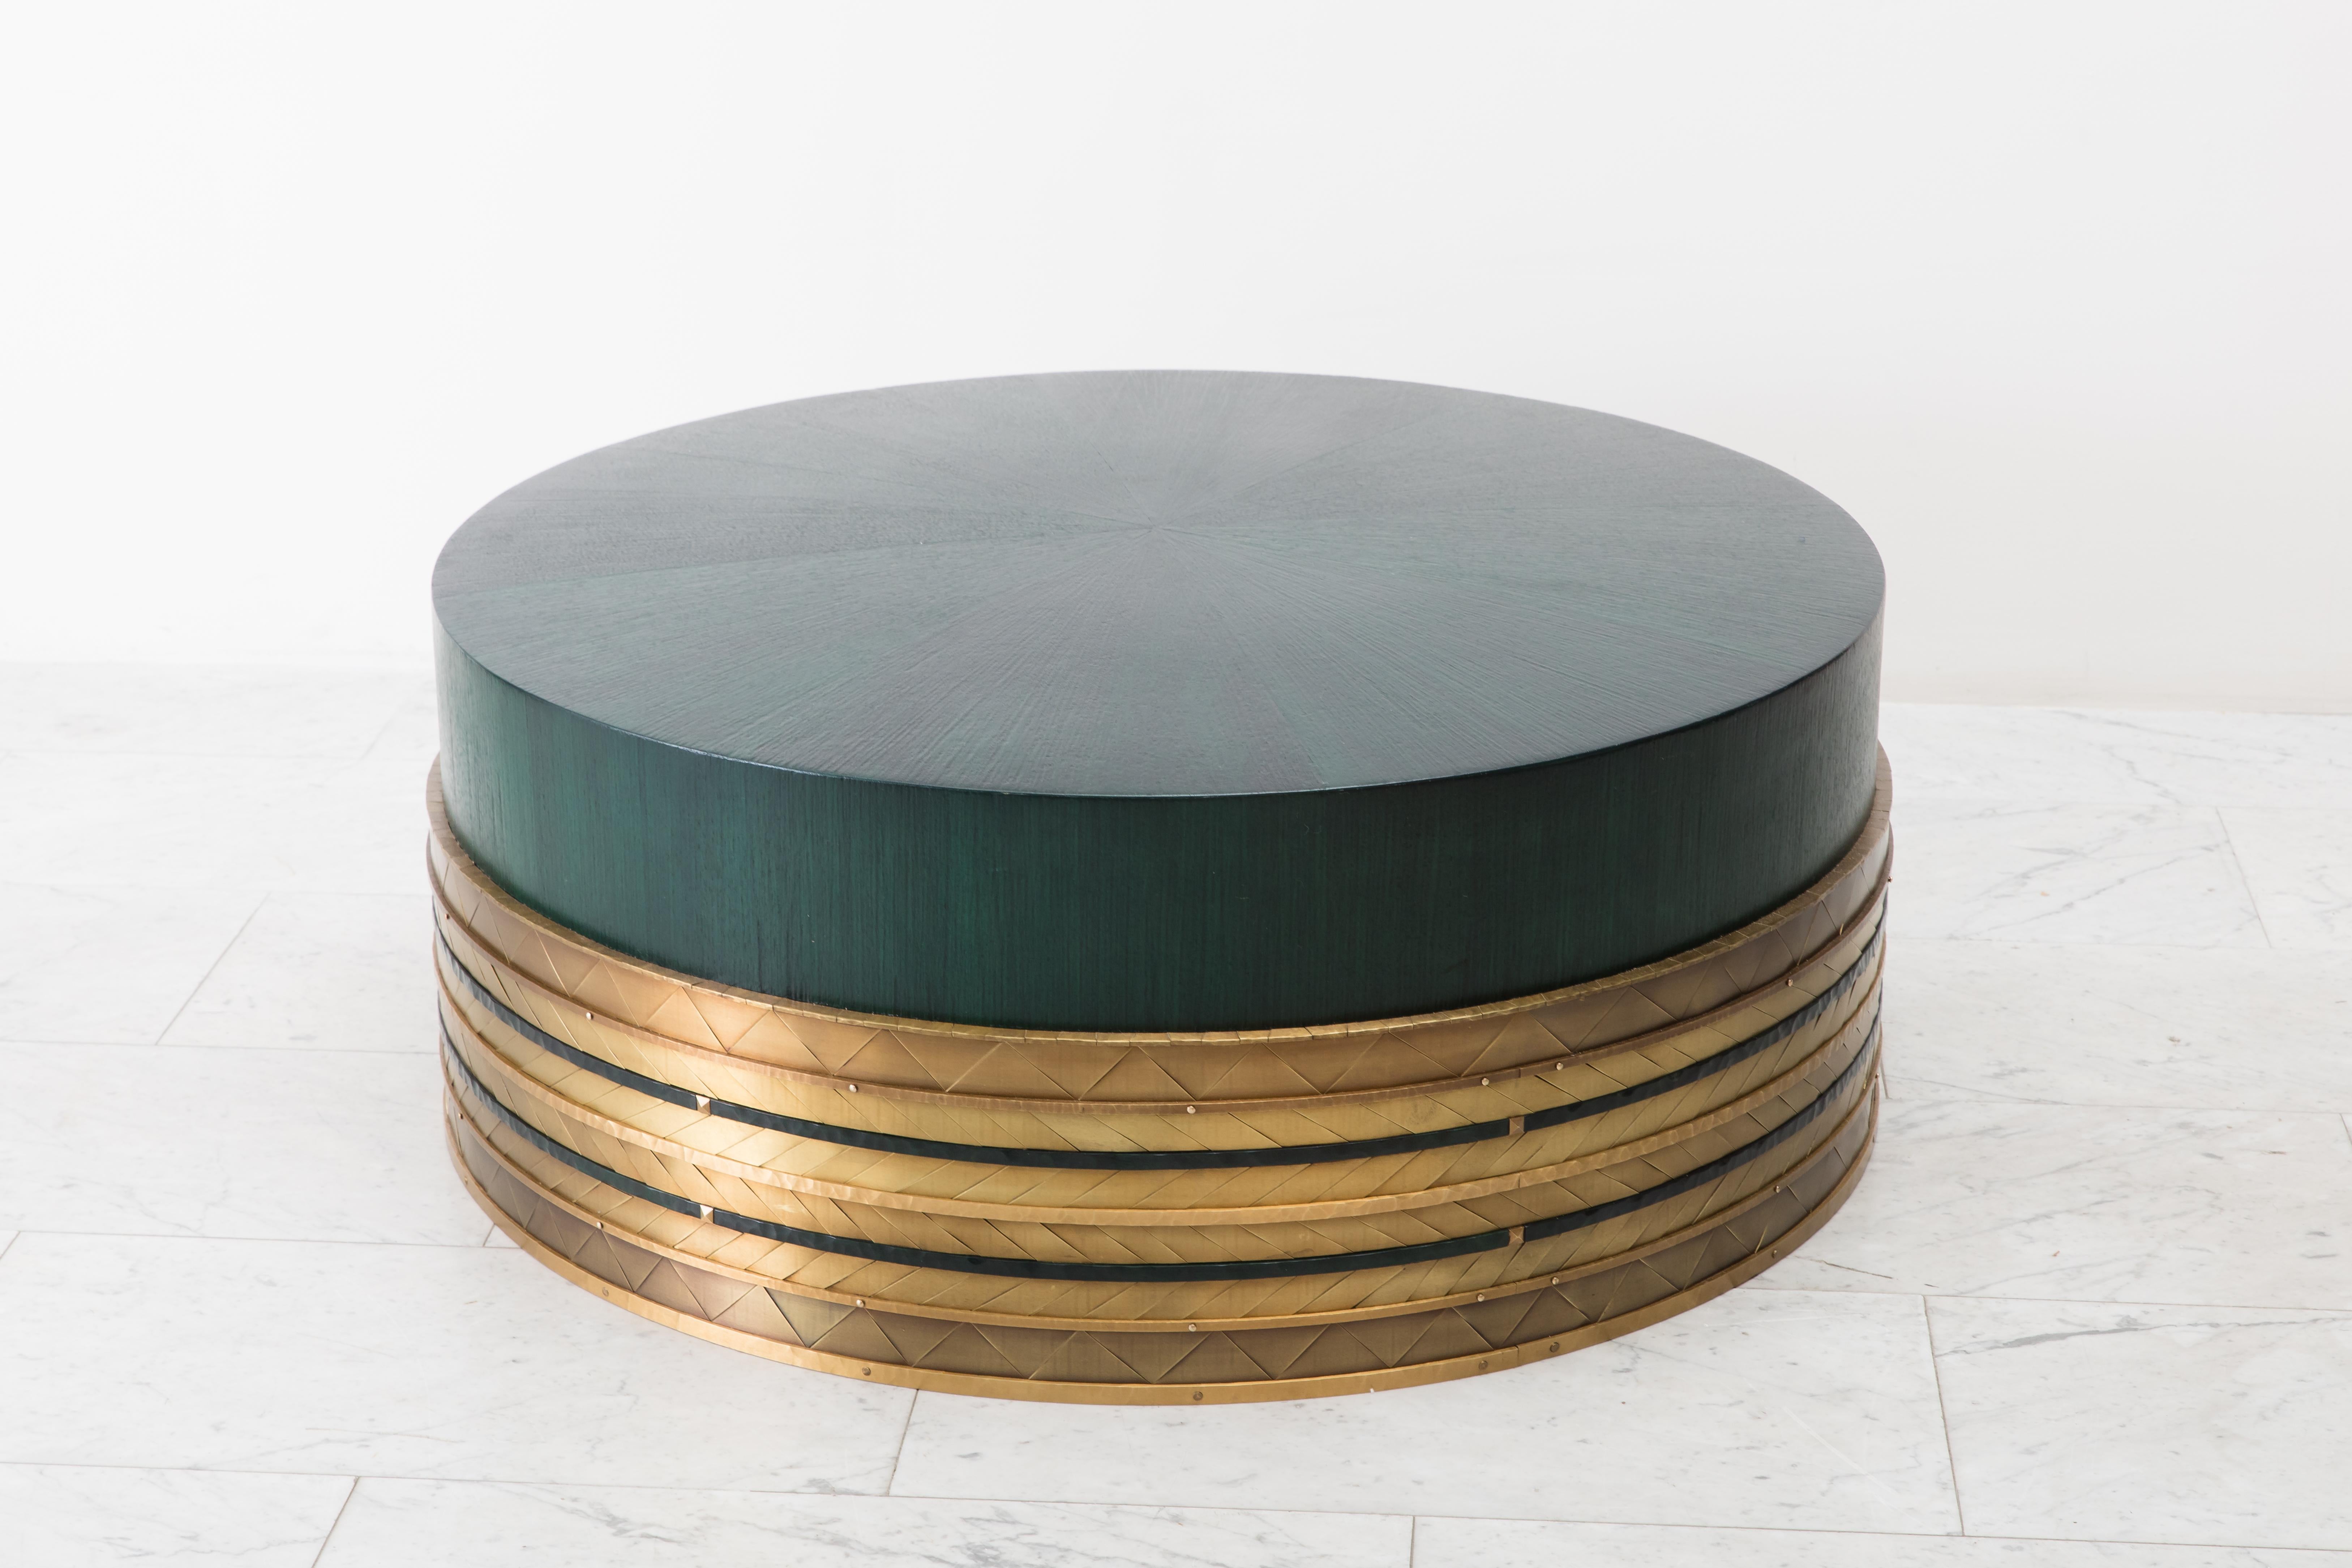 Damian Jones’s Nant Table functions perfectly as a coffee table or cocktail table. Its drum shaped form is sheathed in a mosaic pattern of hand-cut and laid brass “tiles.” Each tile has been patinated in varied colors and shades creating facets that